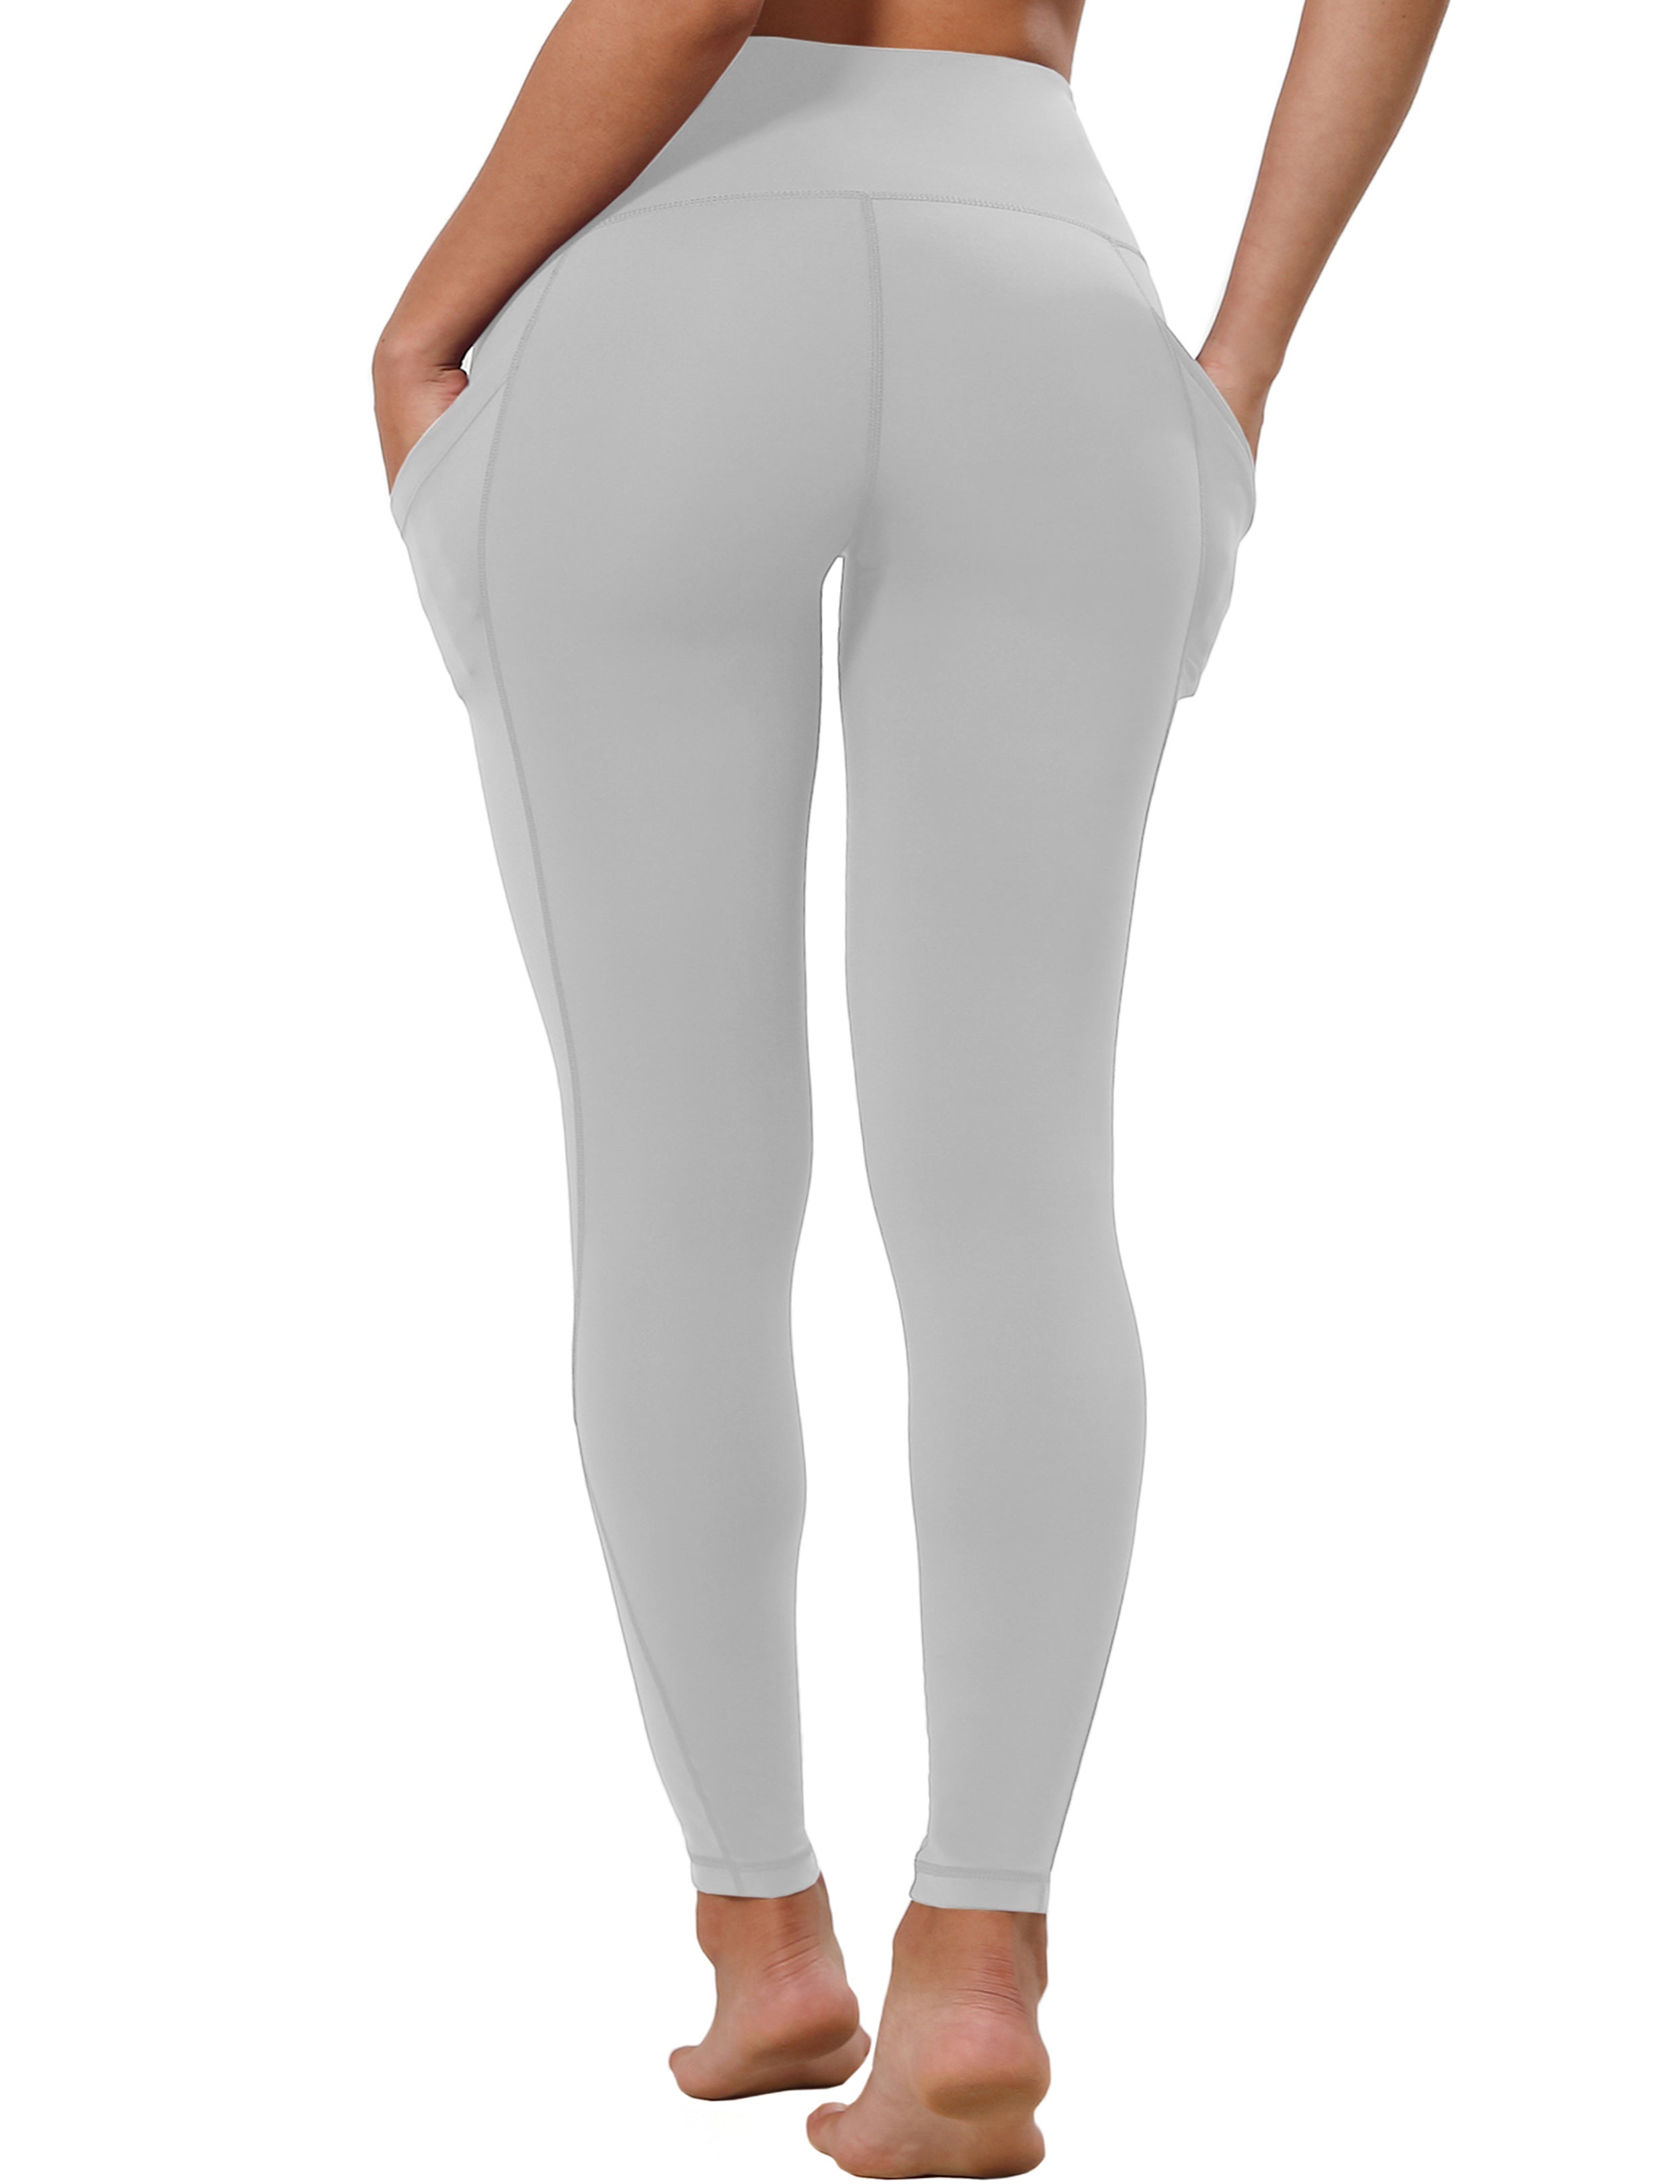 High Waist Side Pockets Pilates Pants lightgray 75% Nylon, 25% Spandex Fabric doesn't attract lint easily 4-way stretch No see-through Moisture-wicking Tummy control Inner pocket